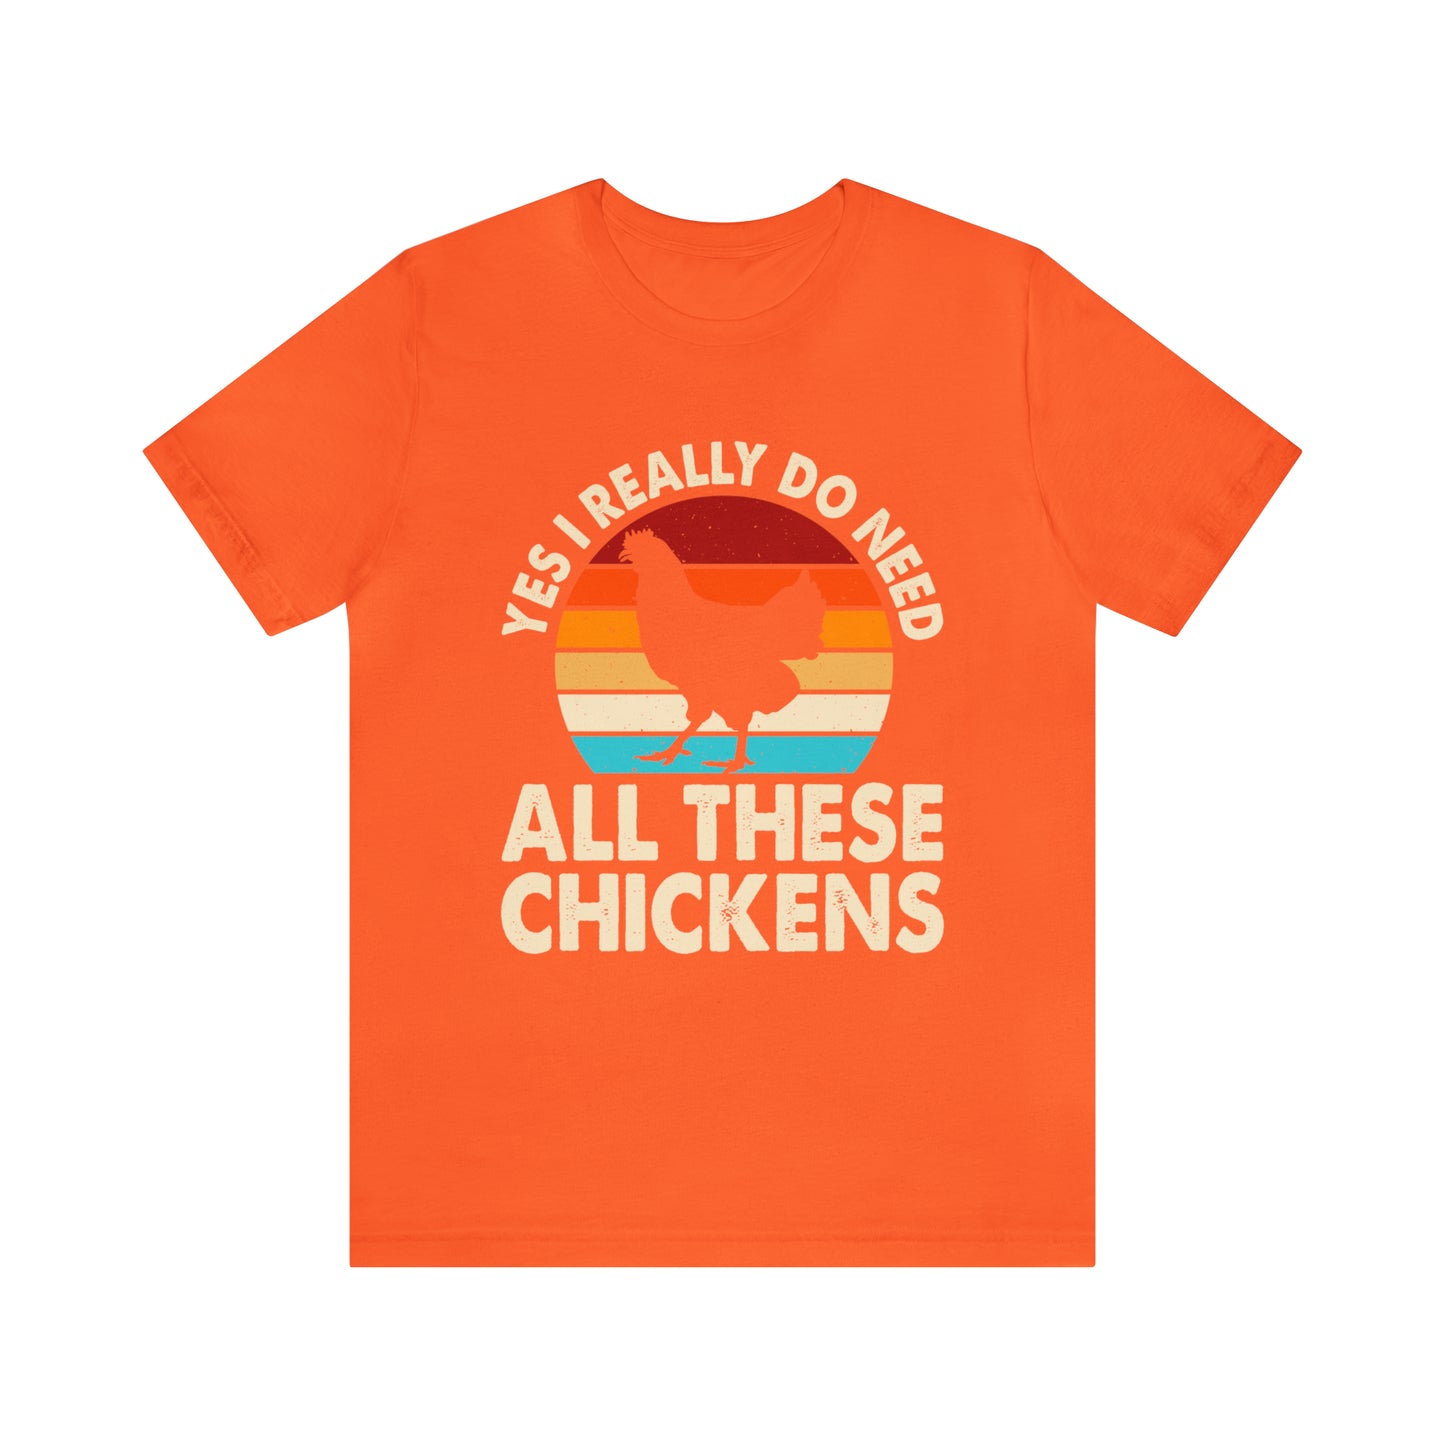 Yes, I Really Do Need All These Chickens T-Shirt - Chicken Shirt, Chicken Mom Tee, Retro Charm and Timeless Style